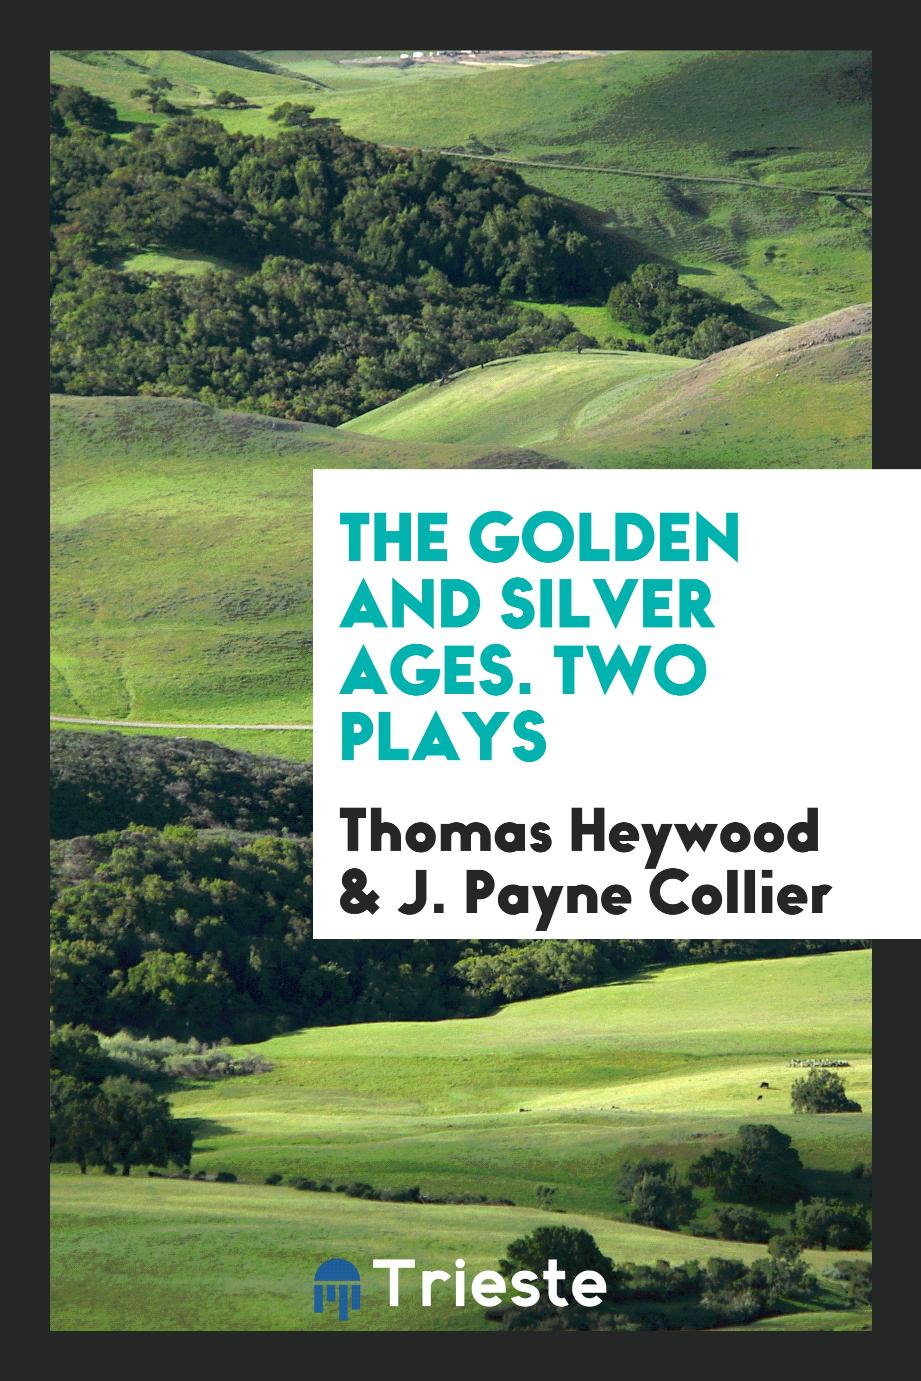 The Golden and Silver ages. Two plays